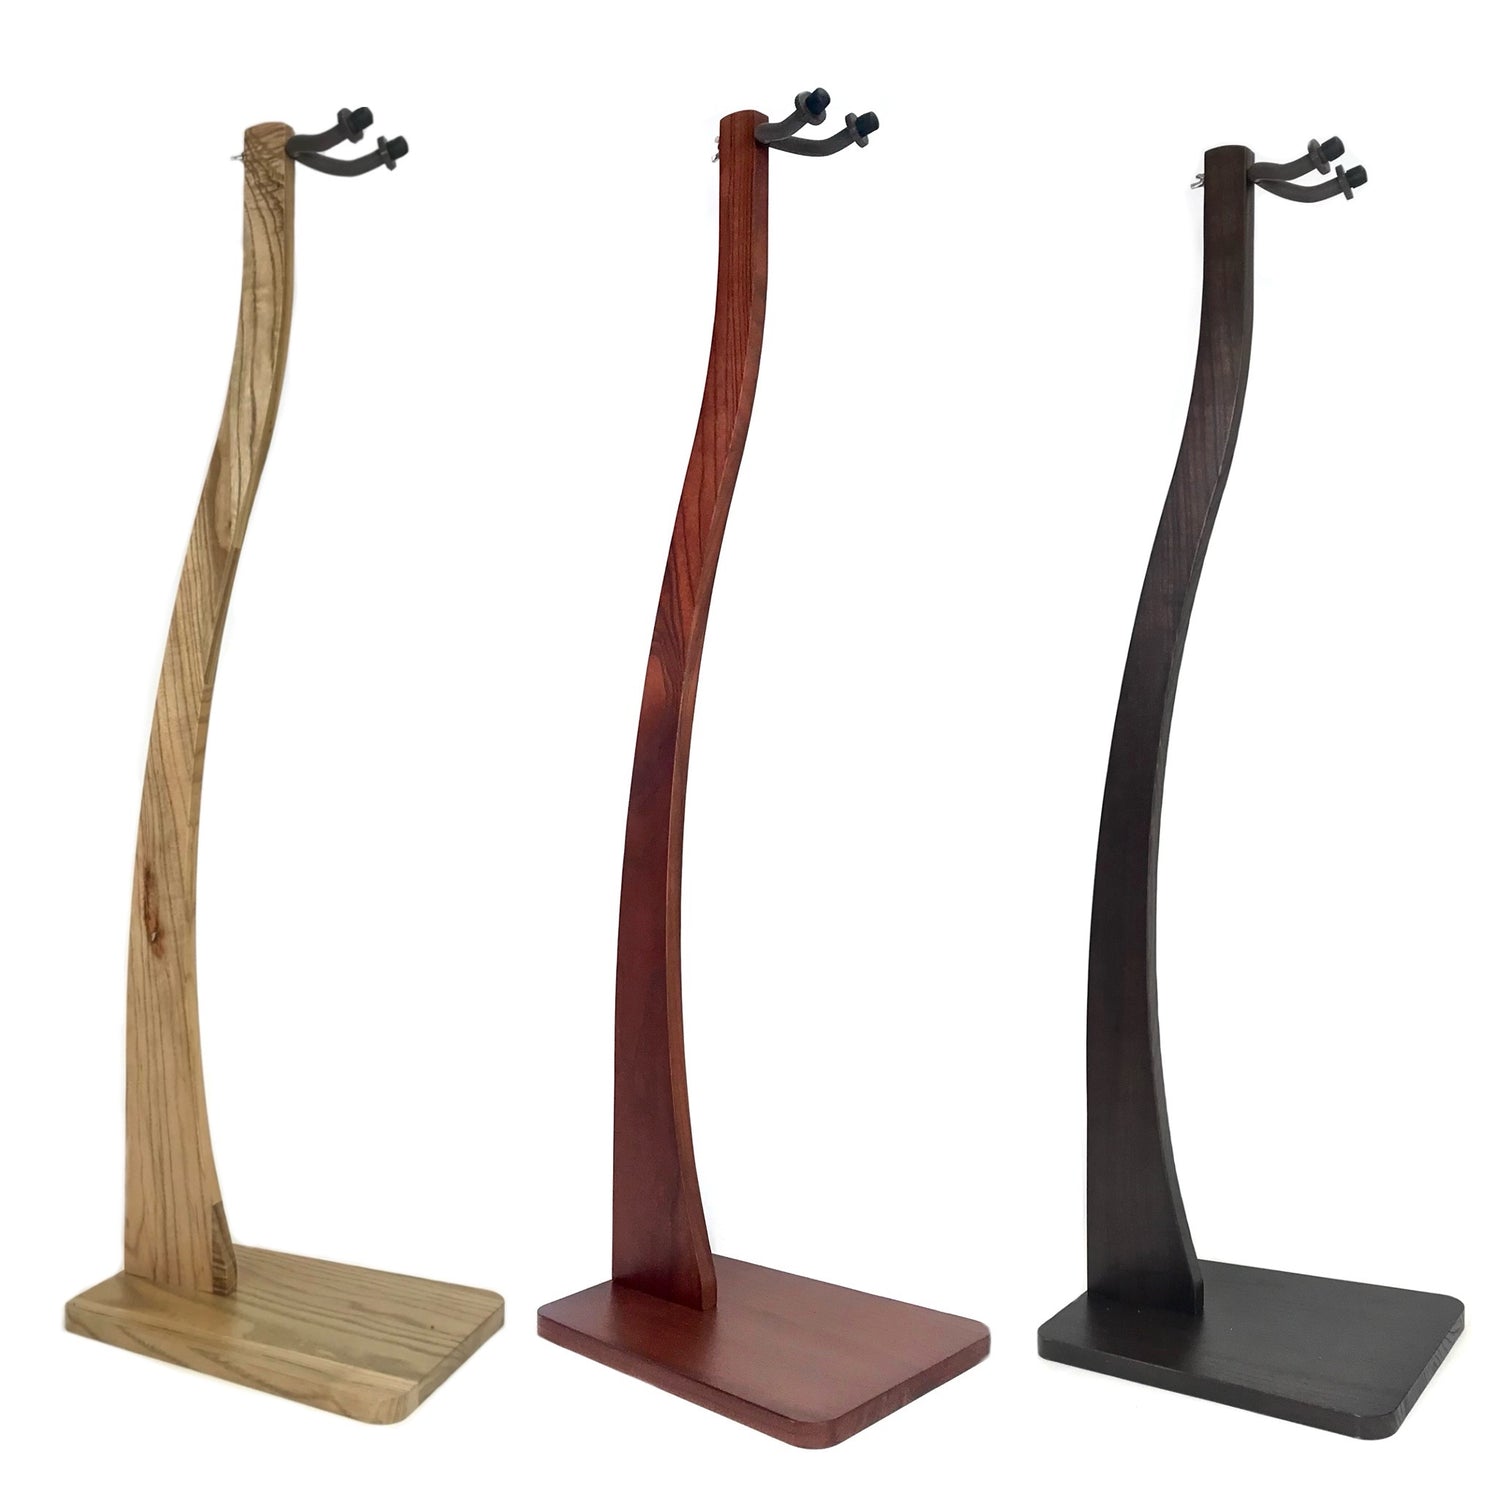 Upright Guitar Stands - Square Base